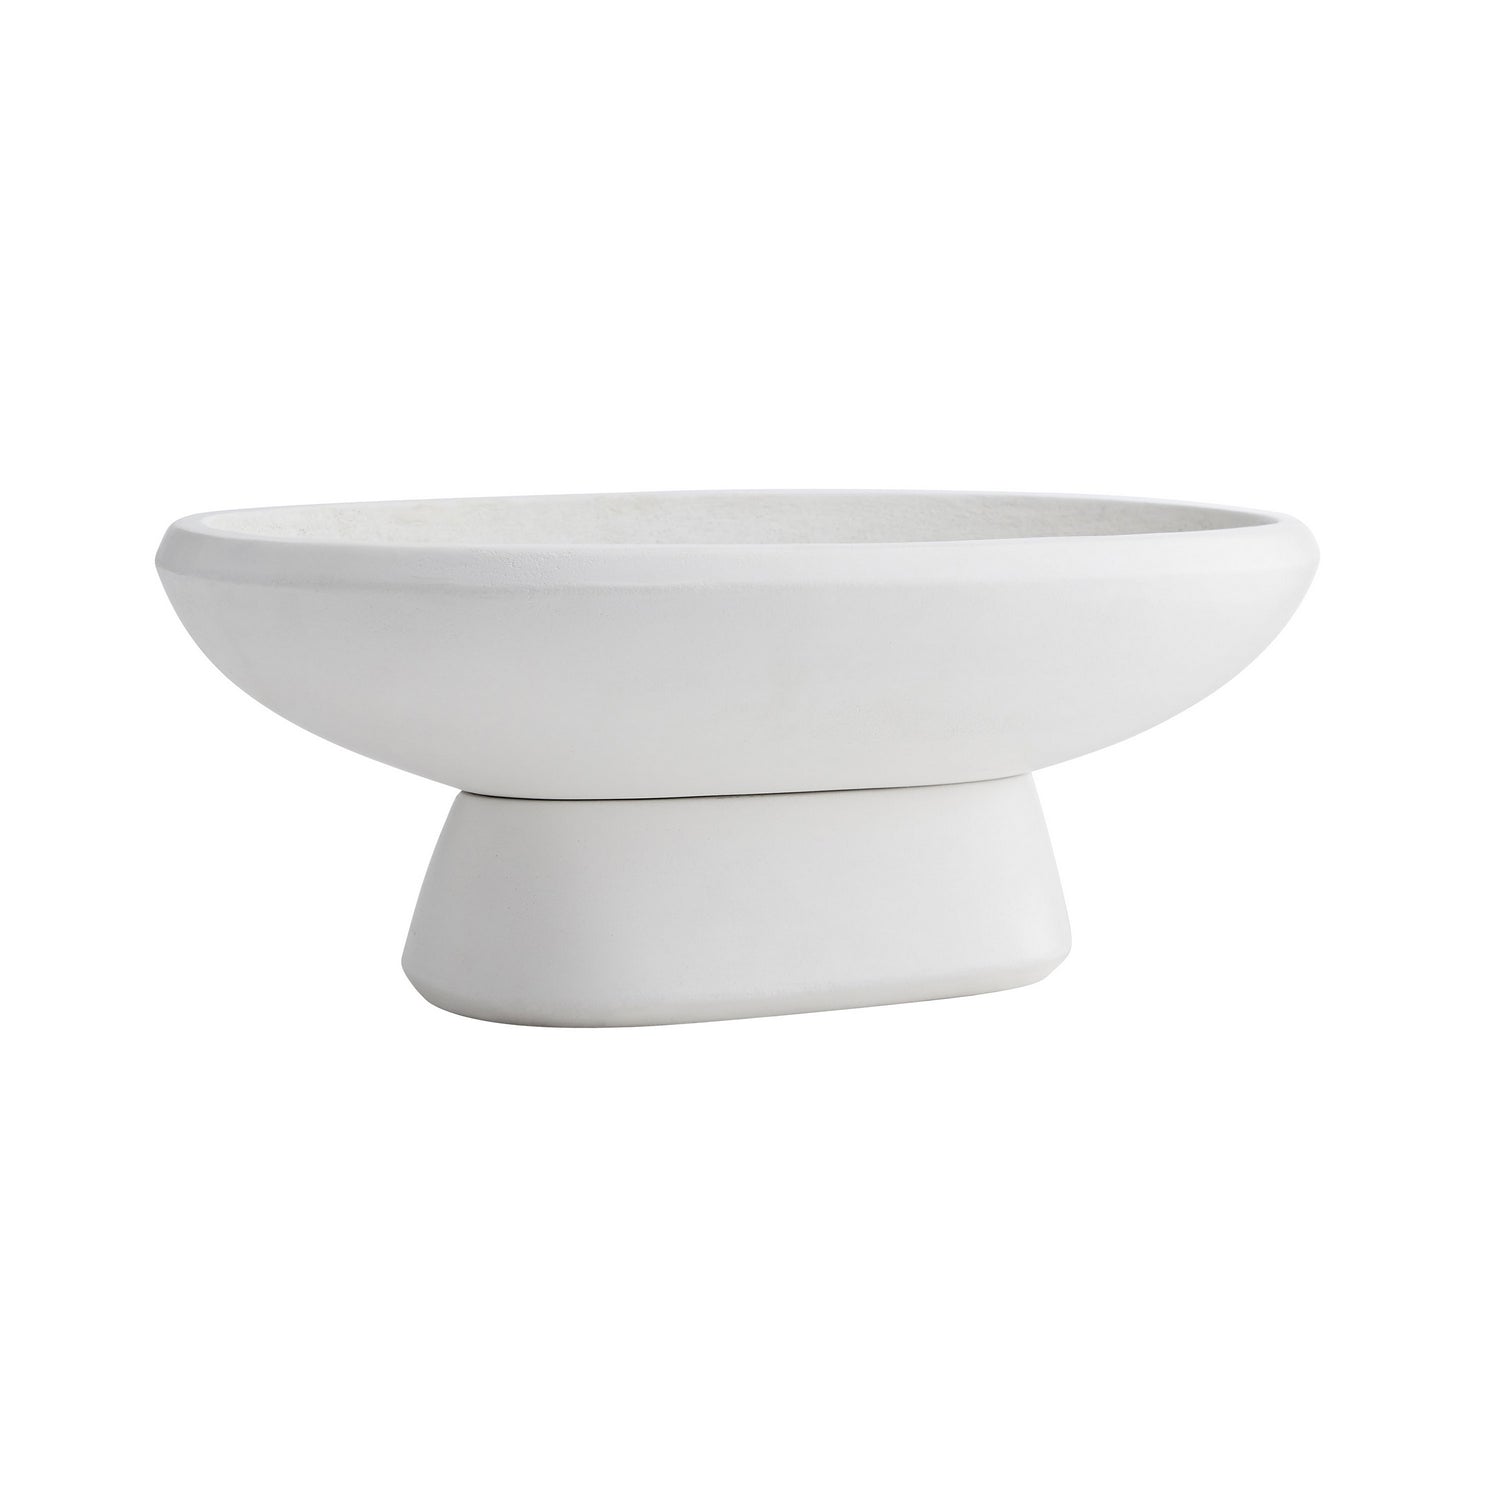 Centerpiece from the Chelsea collection in White finish